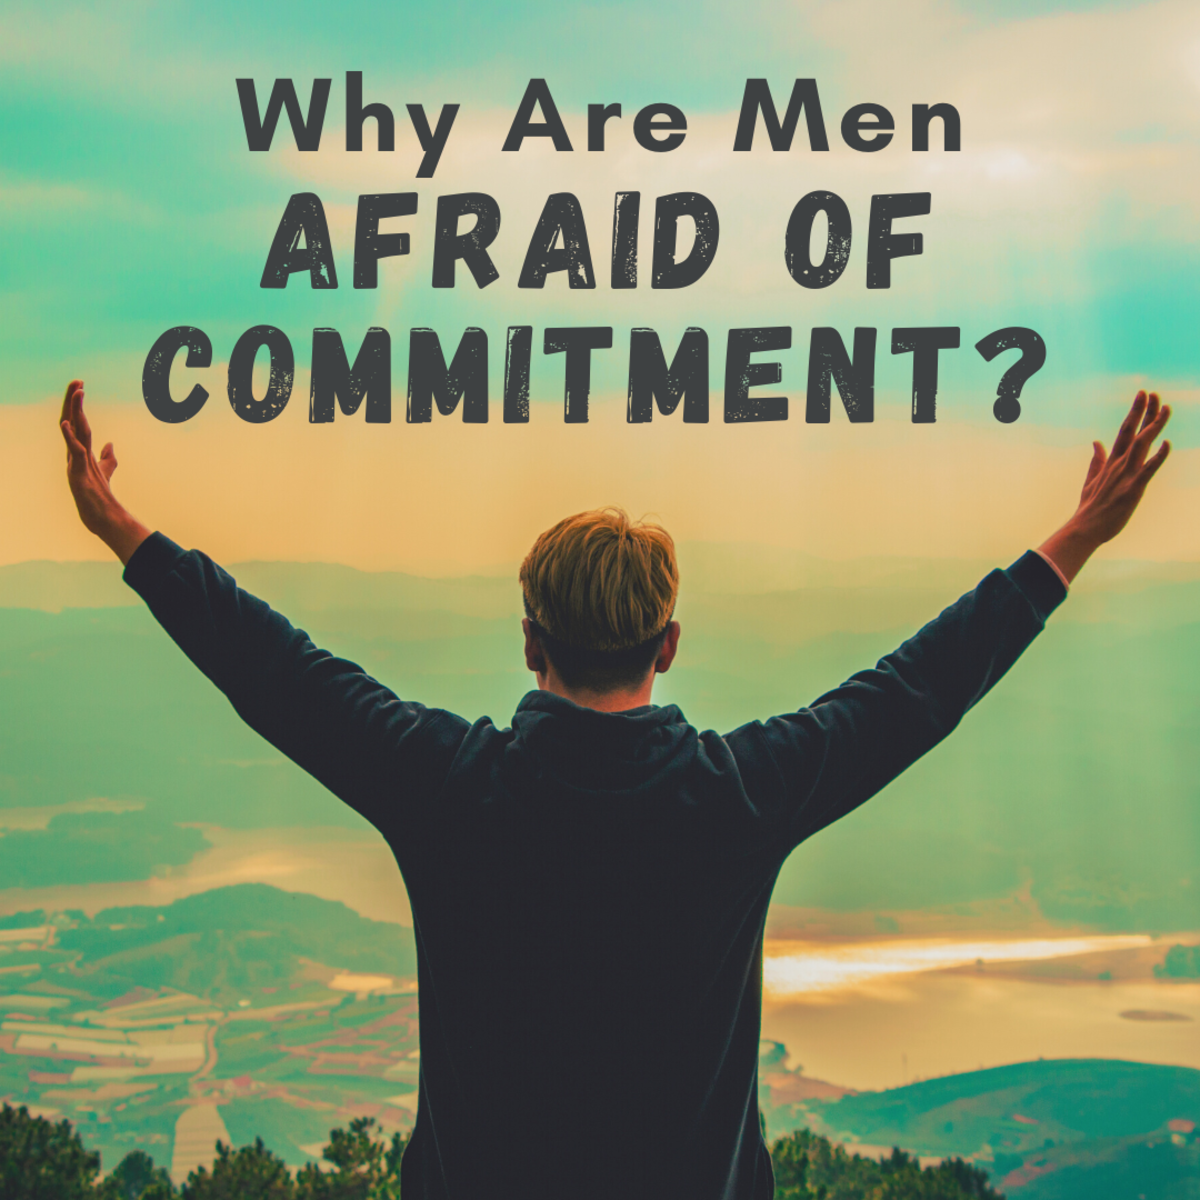 Why are men so scared of commitment? Read on to find out!